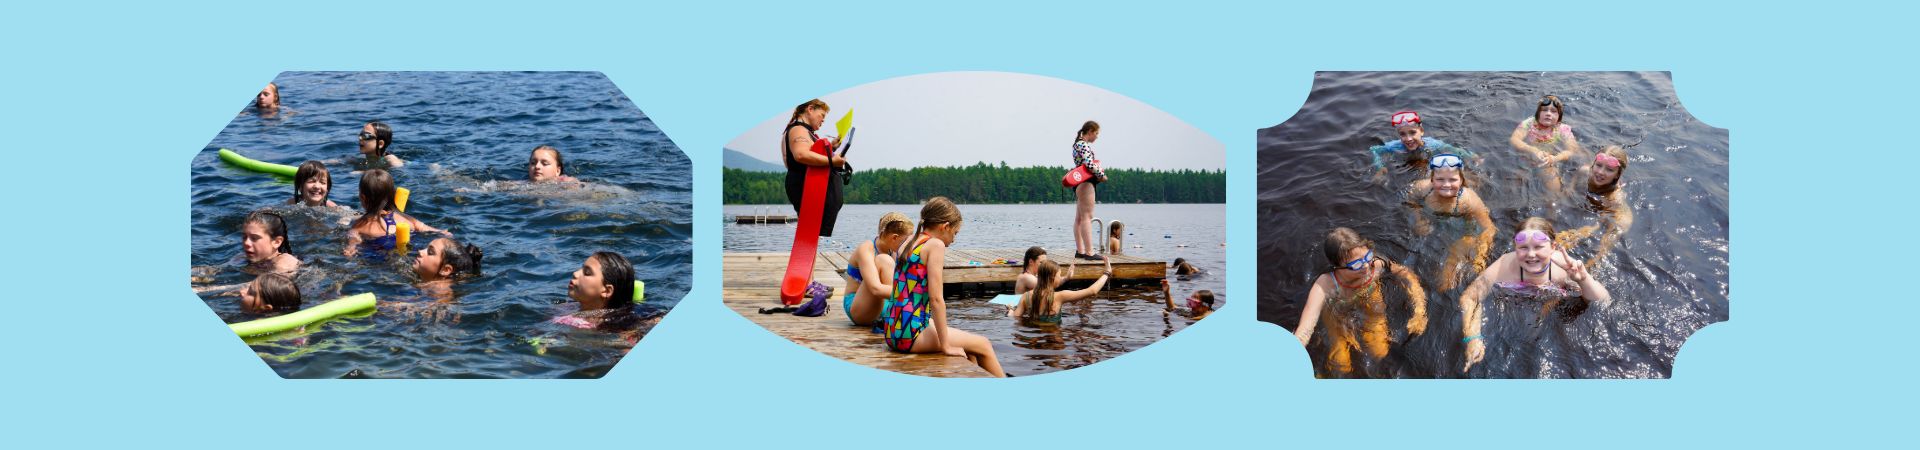  3 pictures of girl scouts in the water at summer camp 